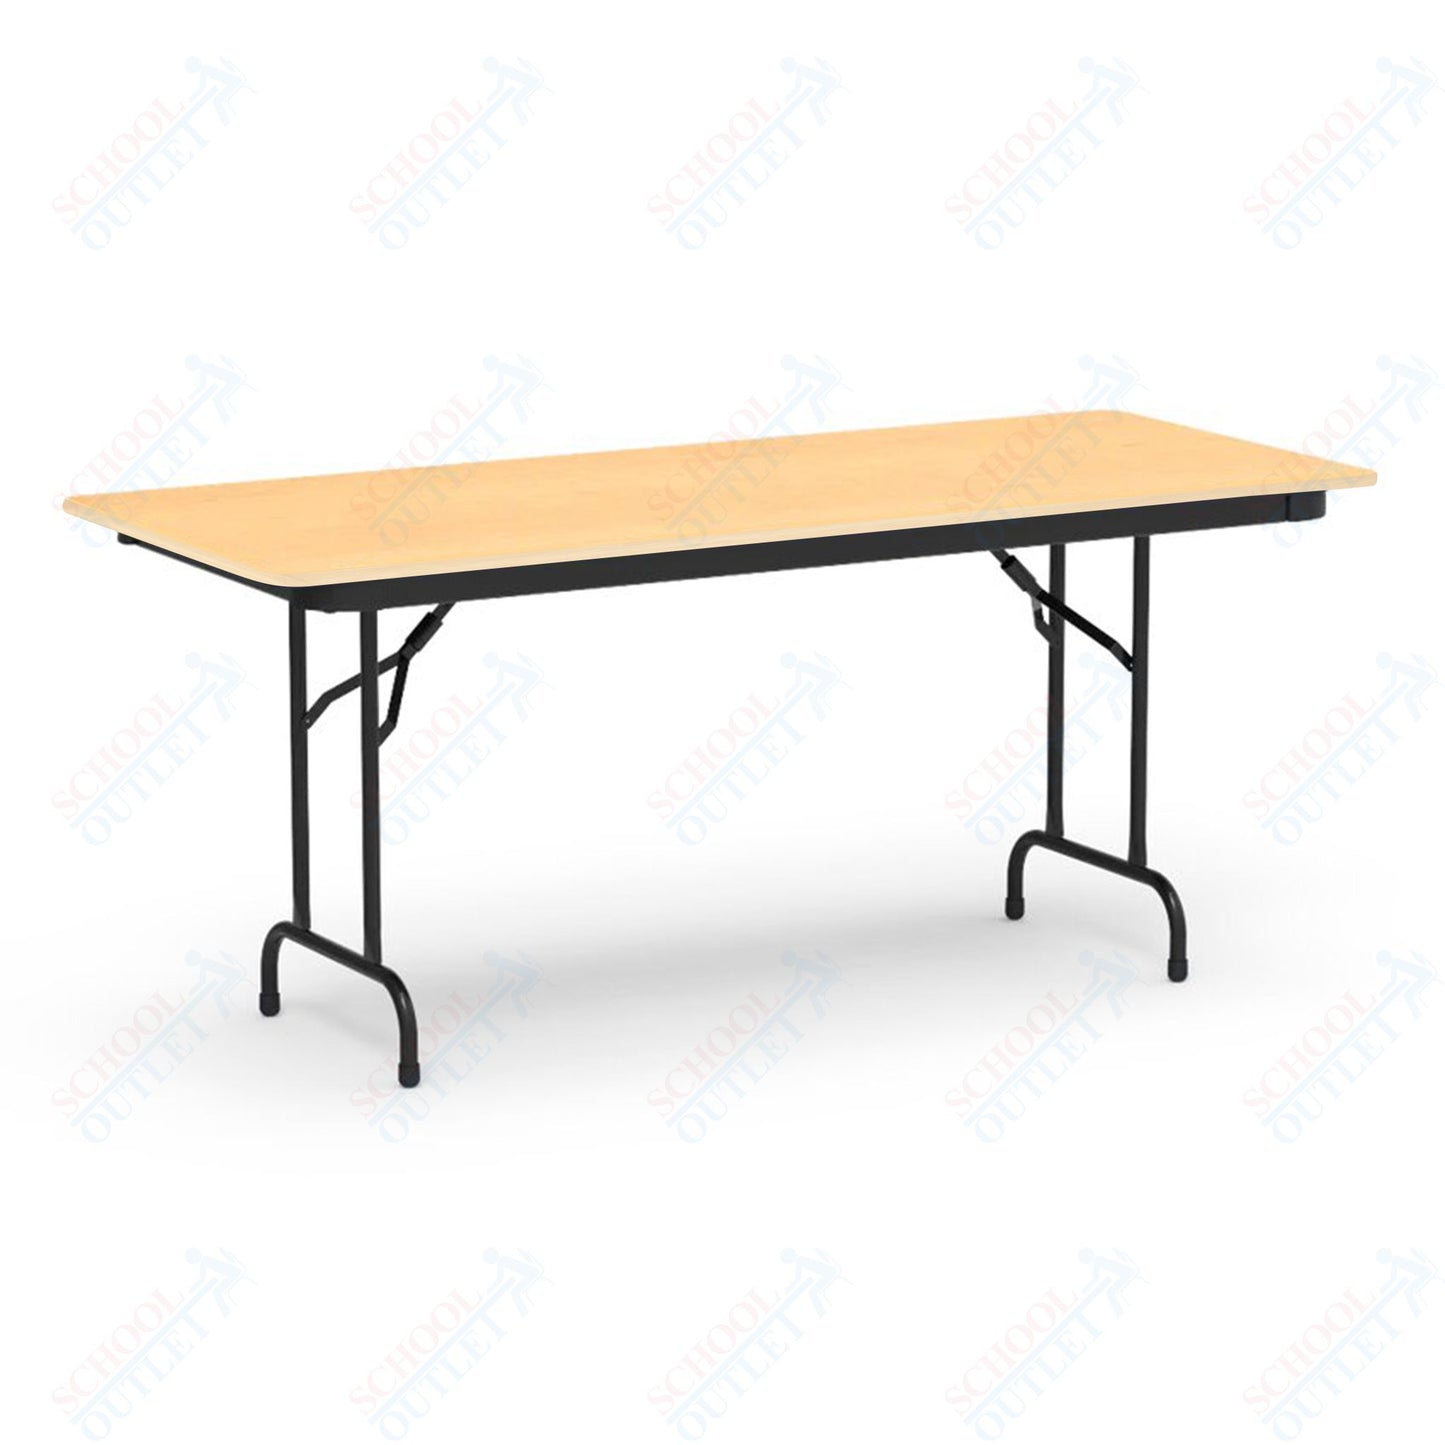 Virco 603072 - 6000 series 3/4" thick particle board folding table 30" x 72"